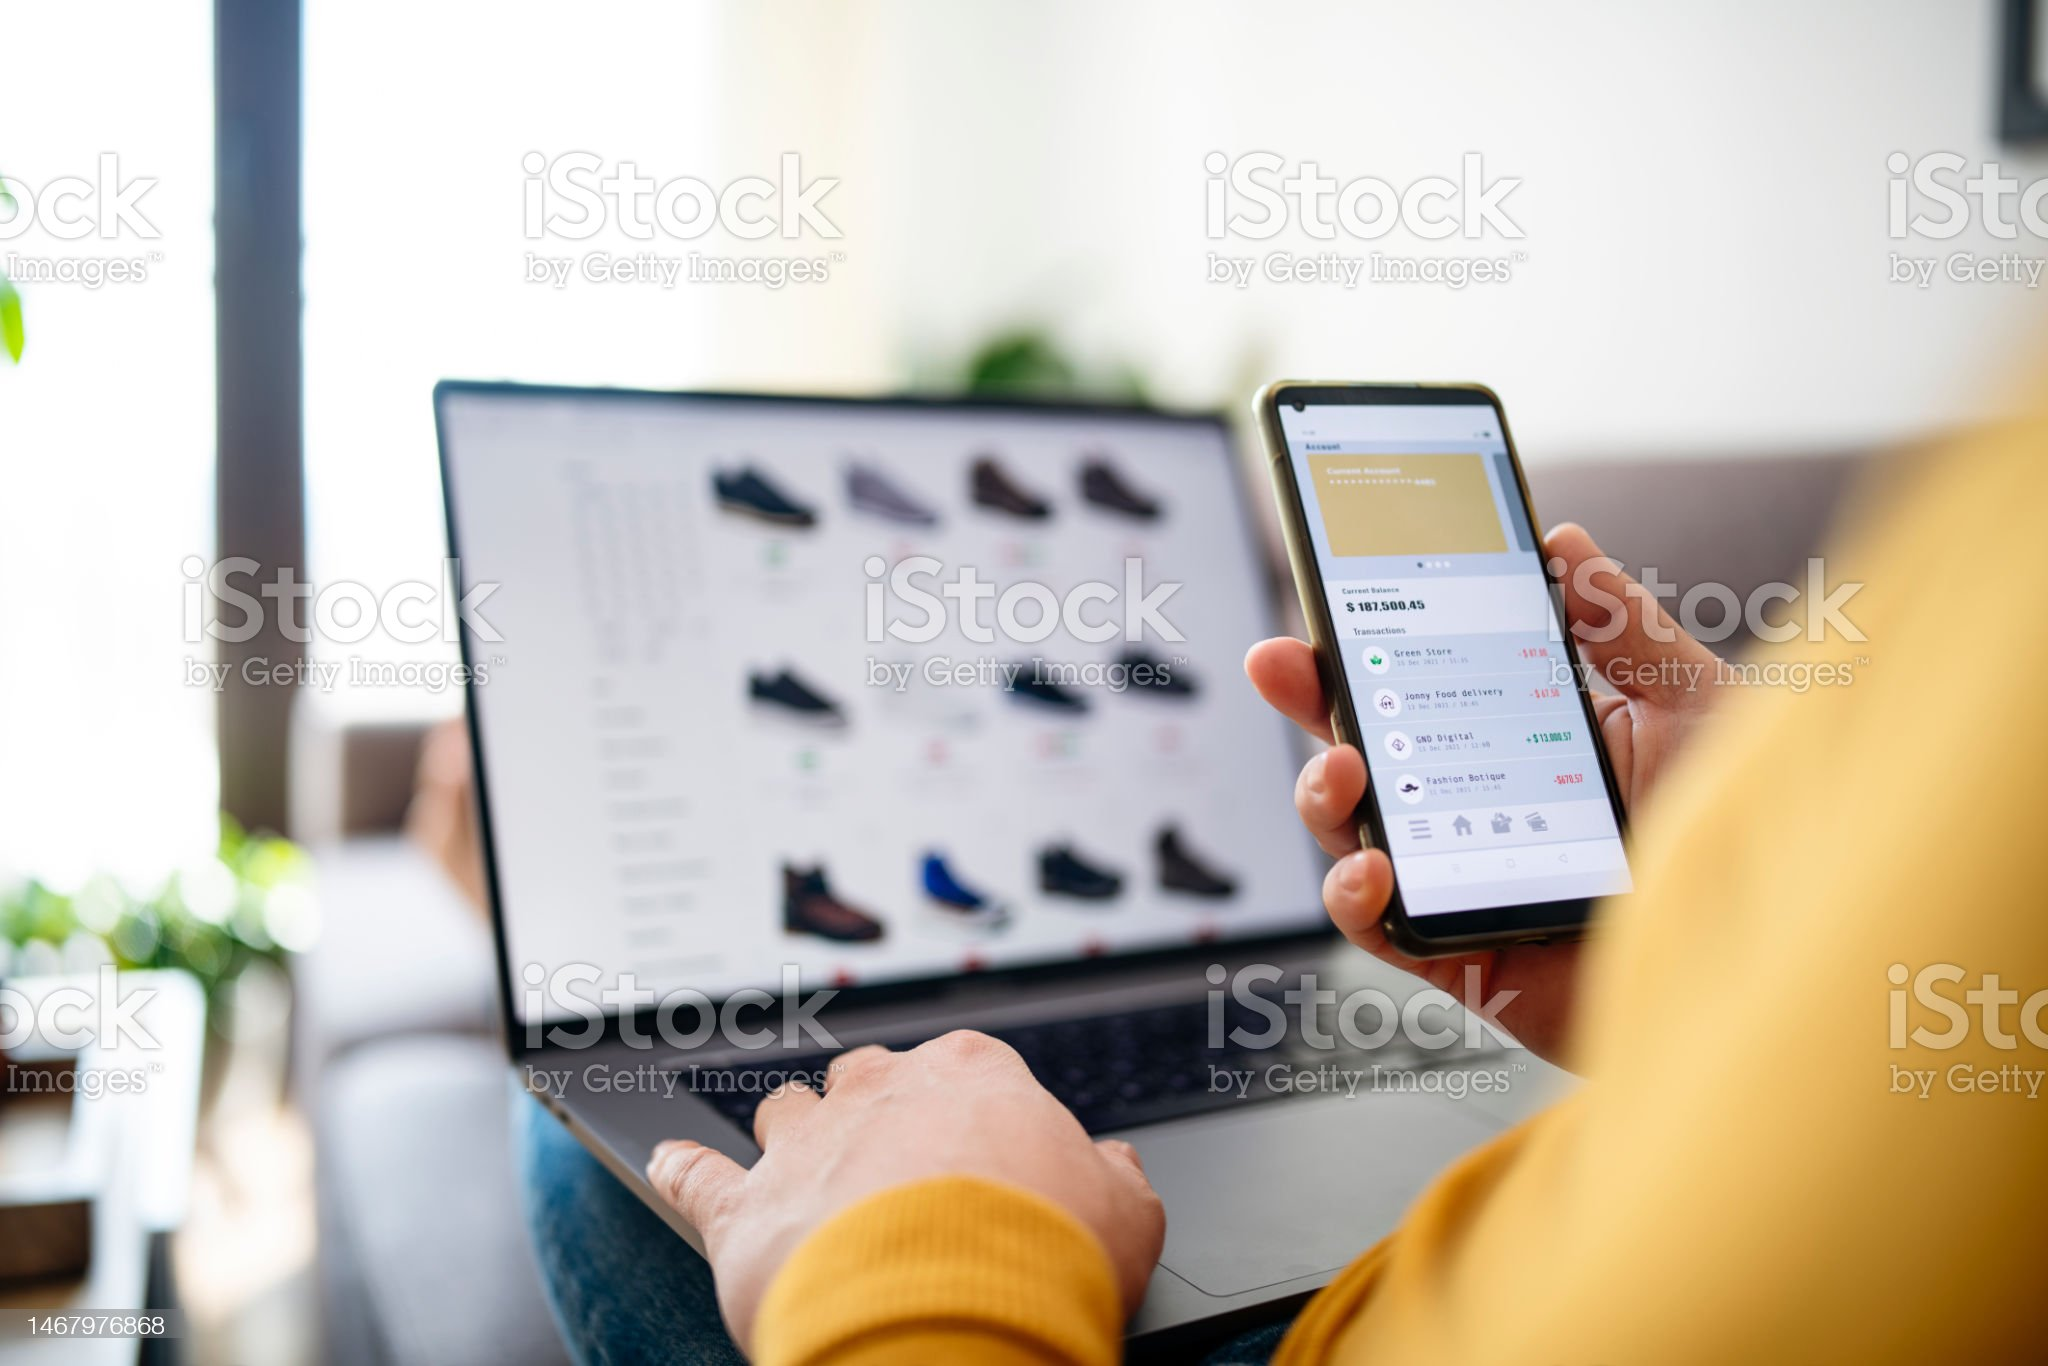 https://www.istockphoto.com/photo/the-convenience-of-shopping-online-gm1467976868-499633289?phrase=online+shopping